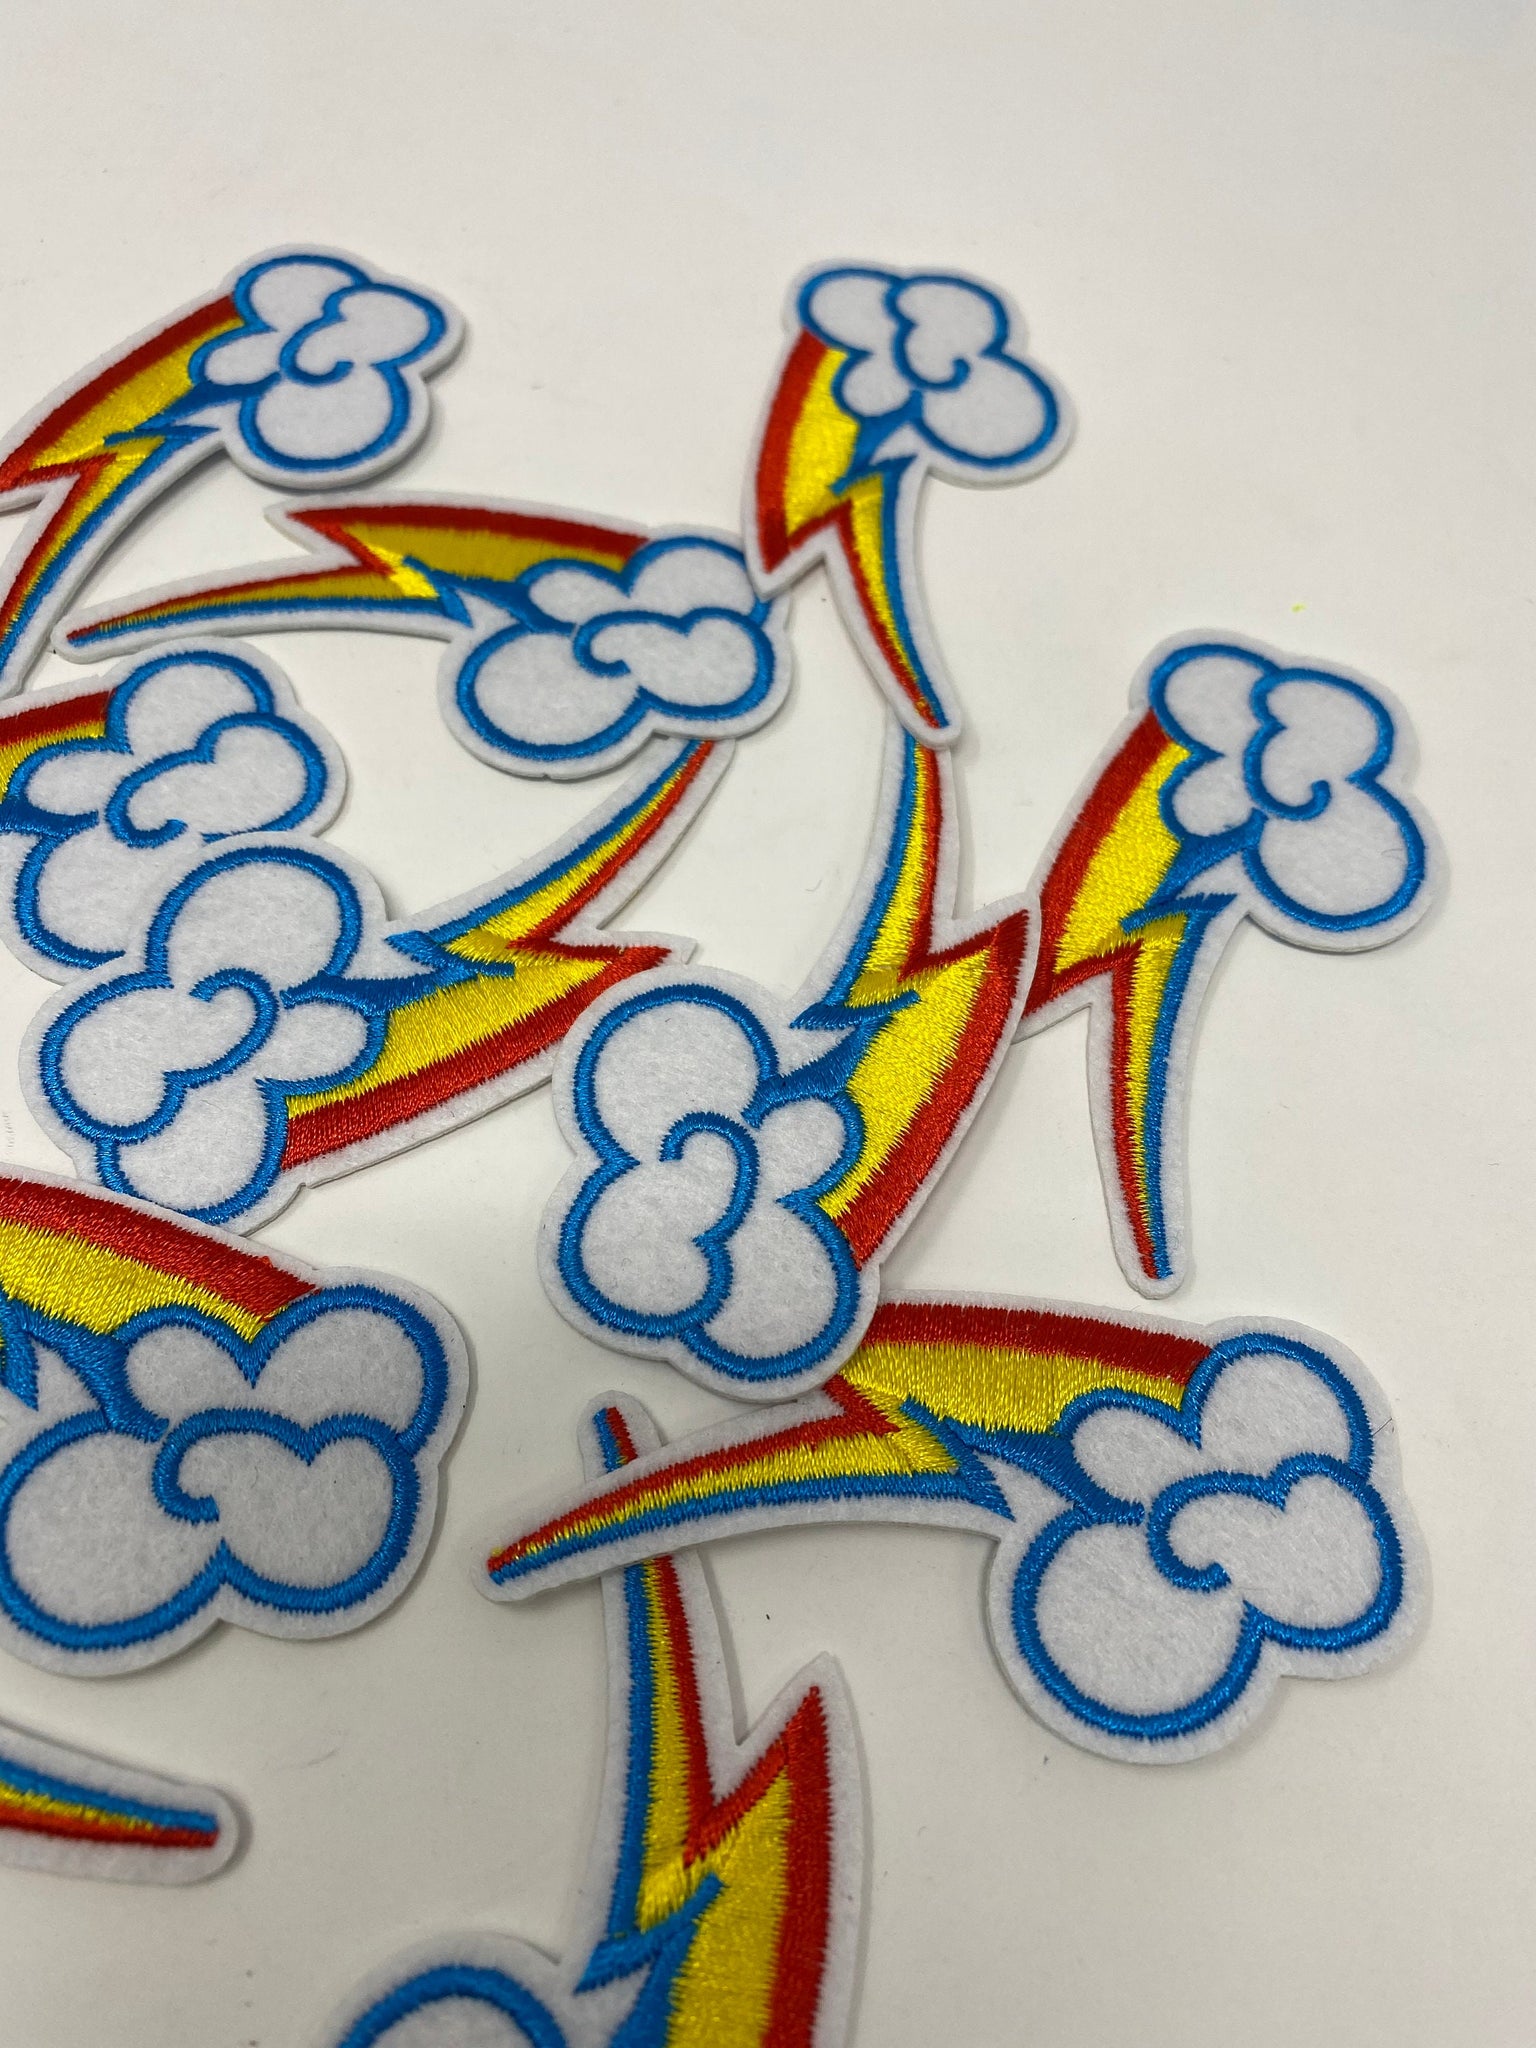 NEW, 2-pc Set, Cloudy Rainbow Bolt, 2-inch Patch, Iron or Sew on Embroidered Applique; Diamond Patch, Popular patches and appliques